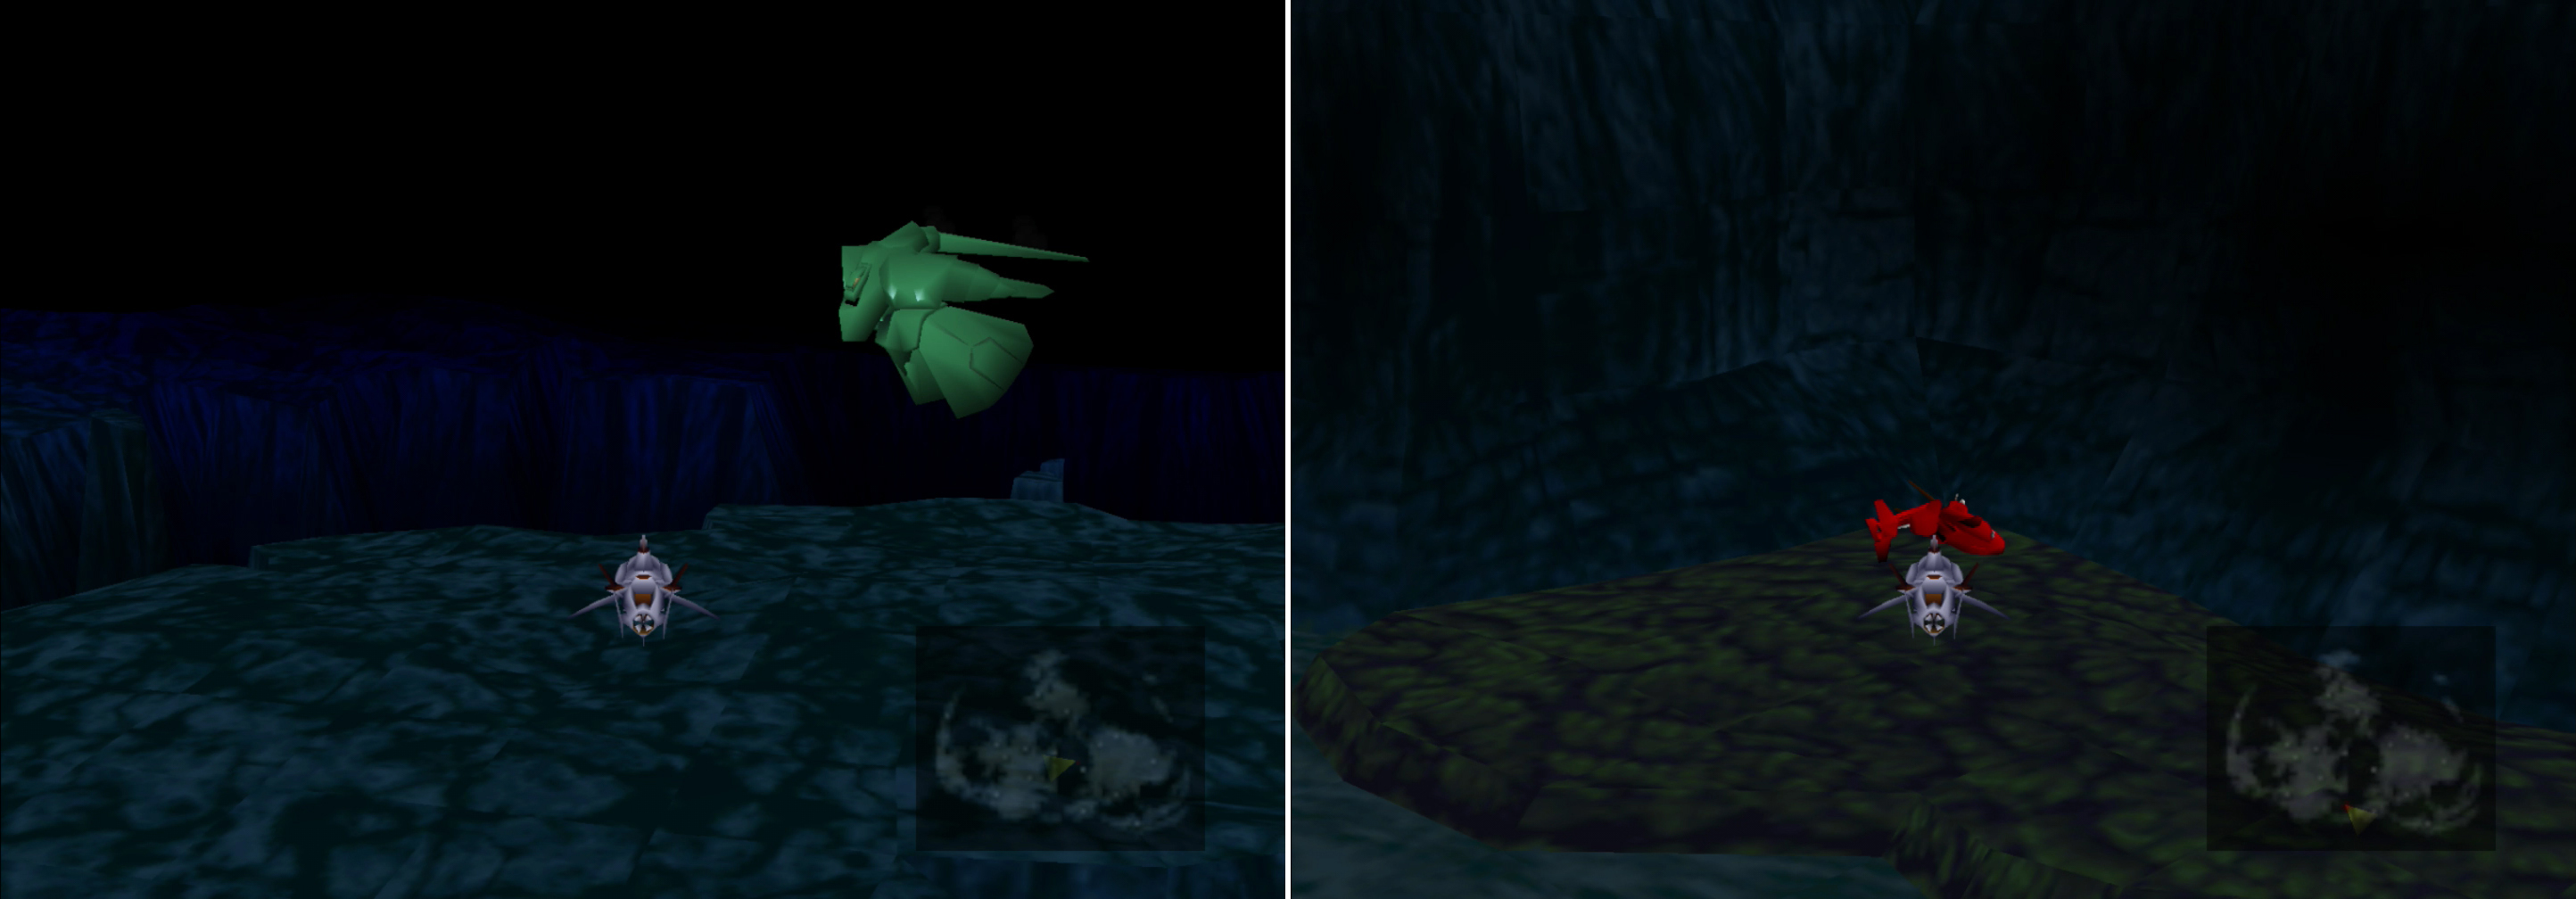 No, it’s not a giant gold fish, it’s Emerald Weapon, a superboss. Avoid it at all costs (left). Locate the red Shinra submarine you sunk earlier to recover the Huge Materia it was carrying (right).